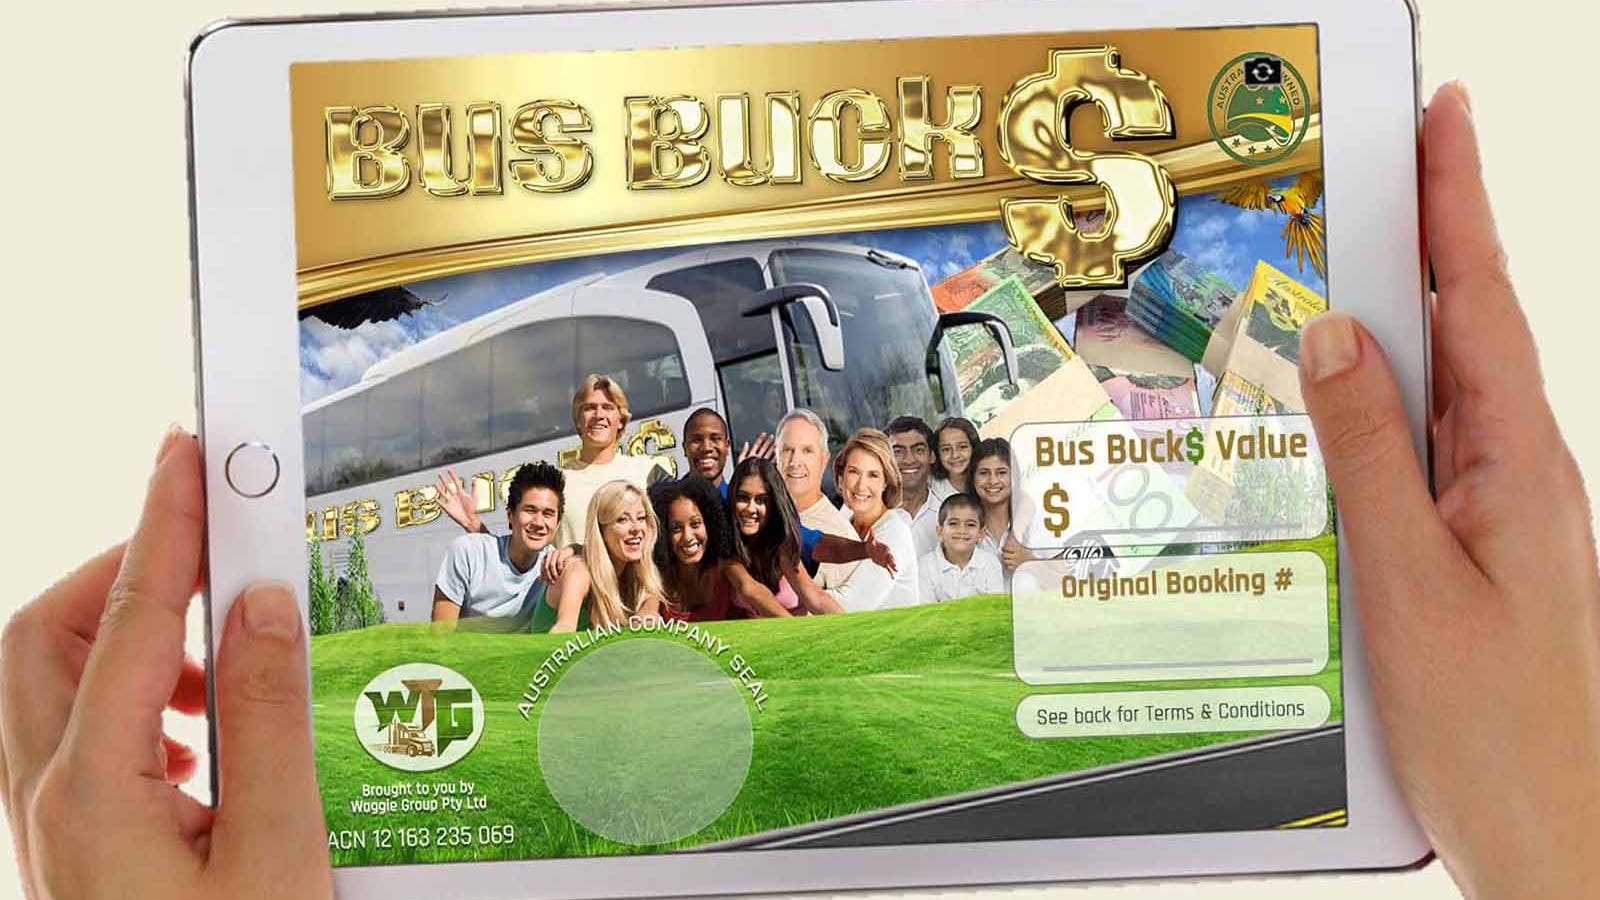 Cooee Tours rewards travelers with our unique Bus Buck$ currency for future trips